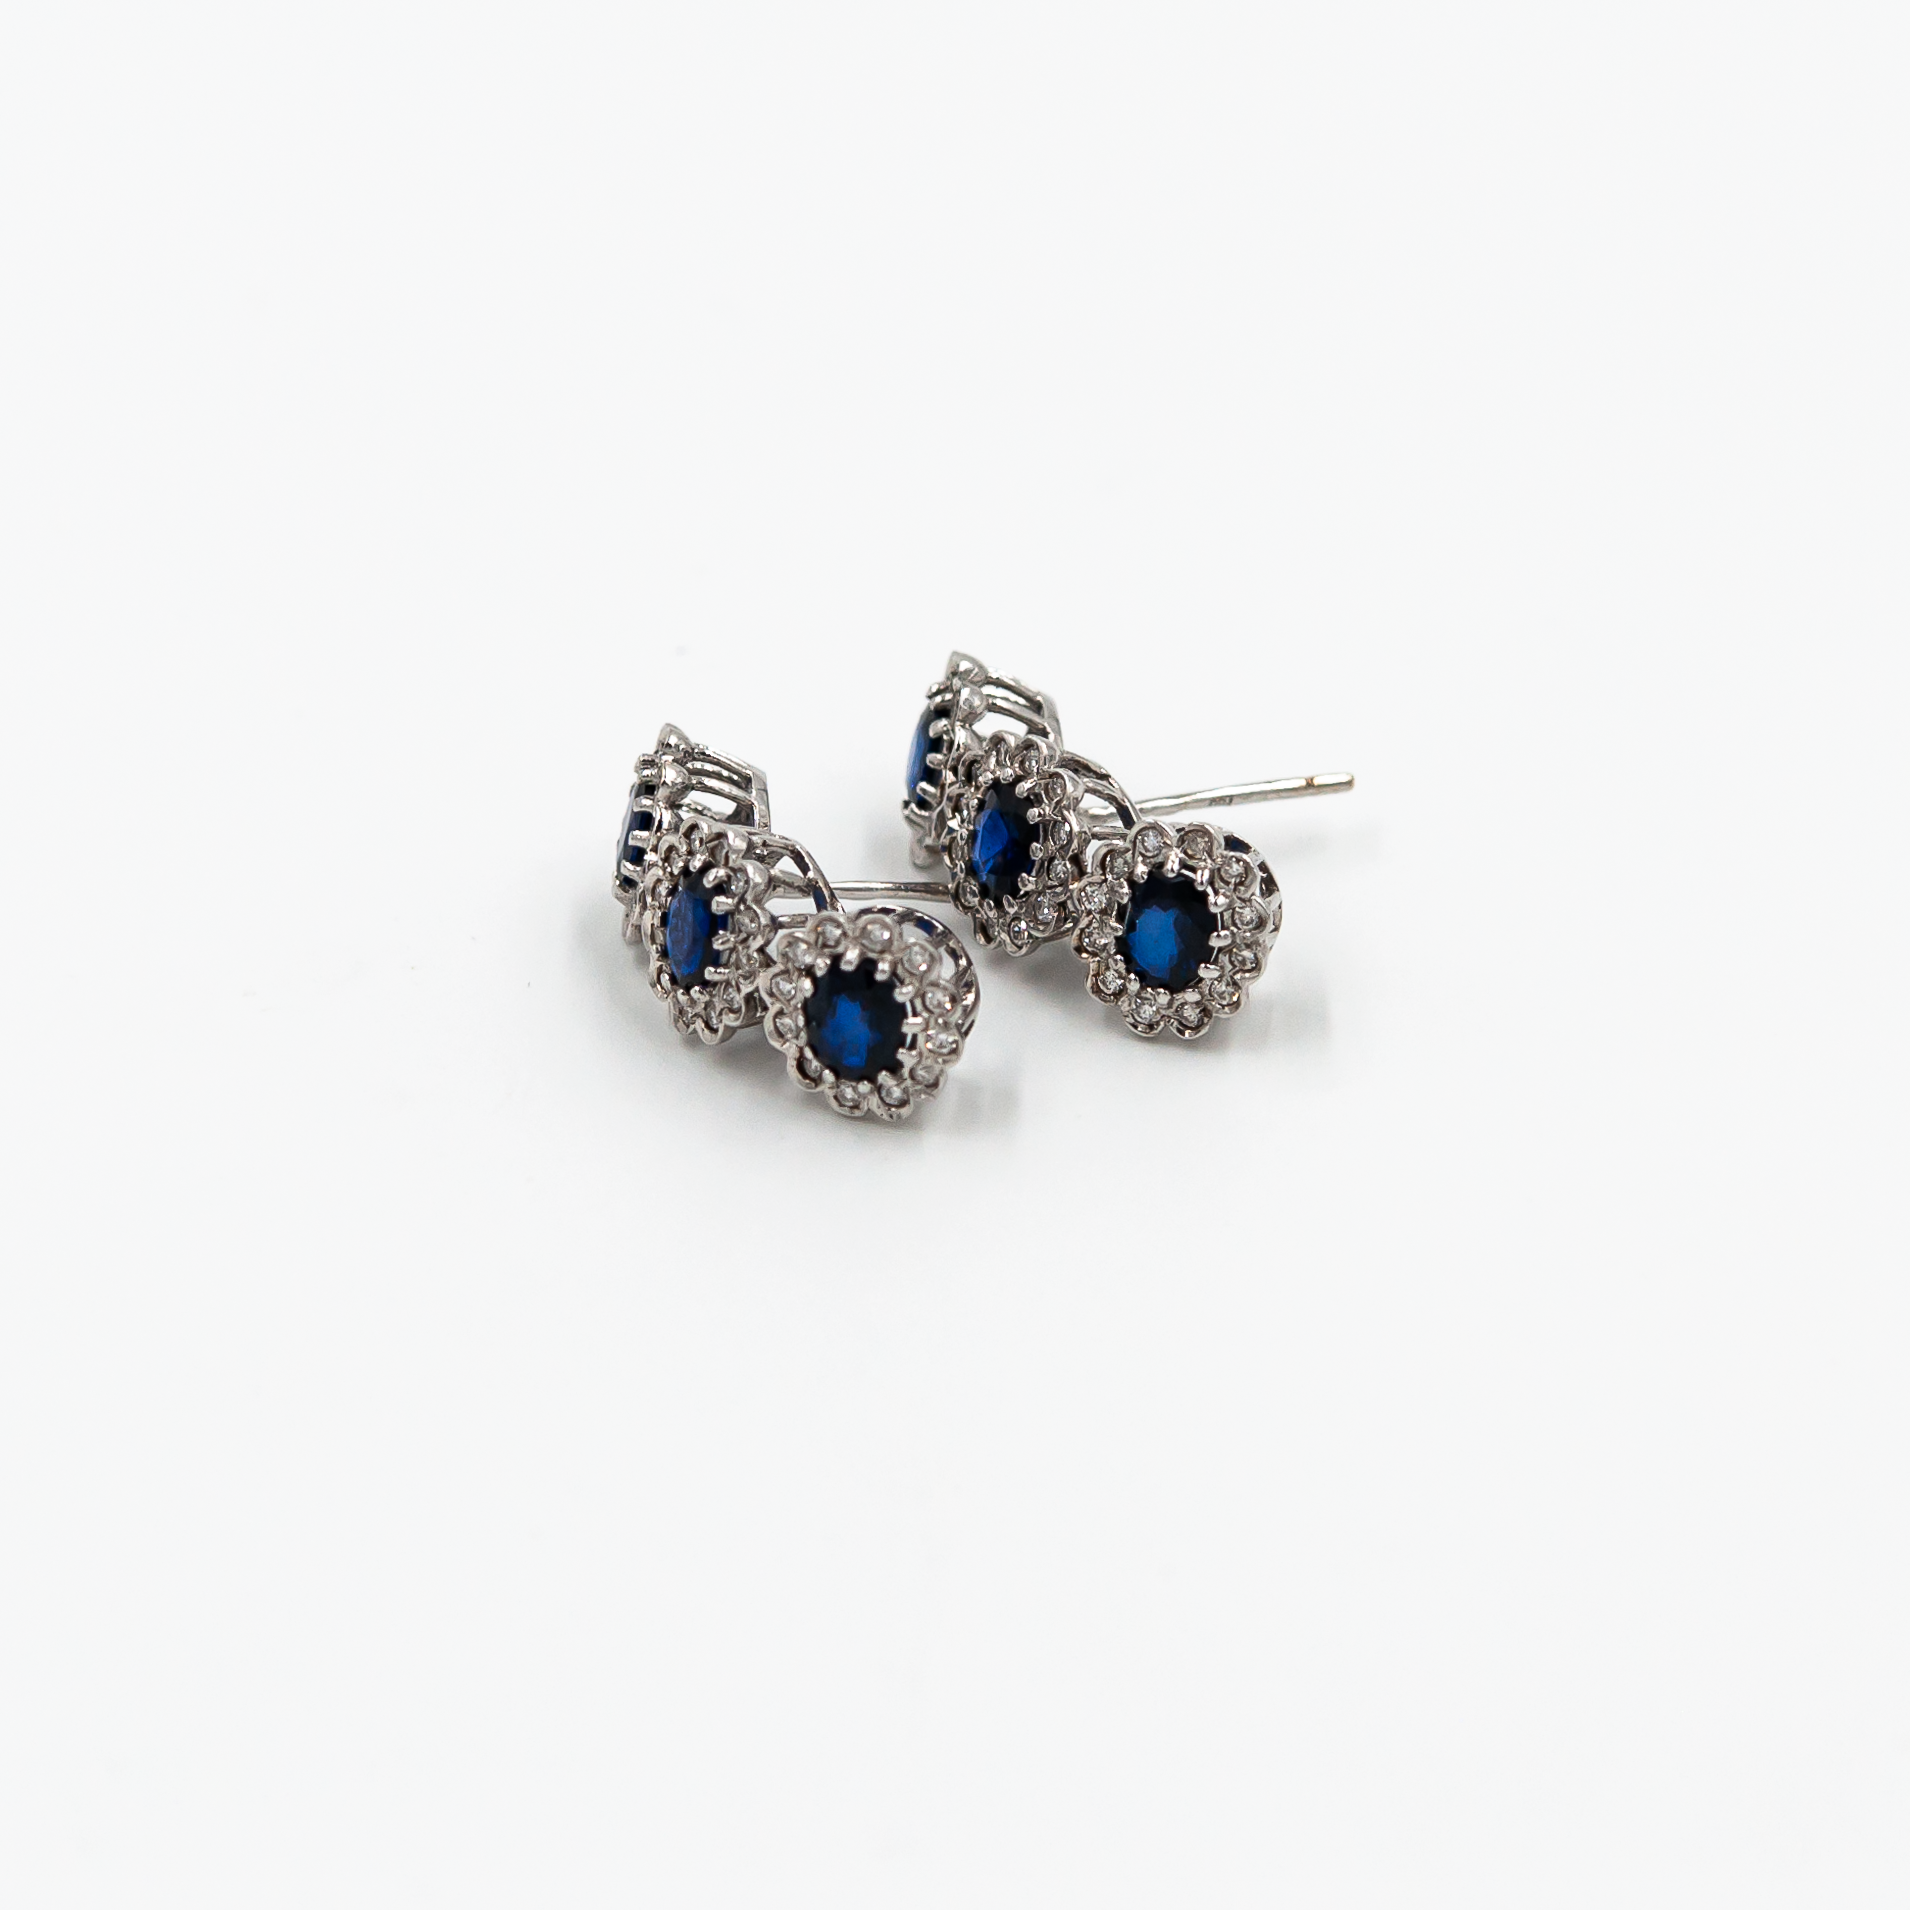 Trio Round Galaxy Earrings with Diamonds and Sapphires